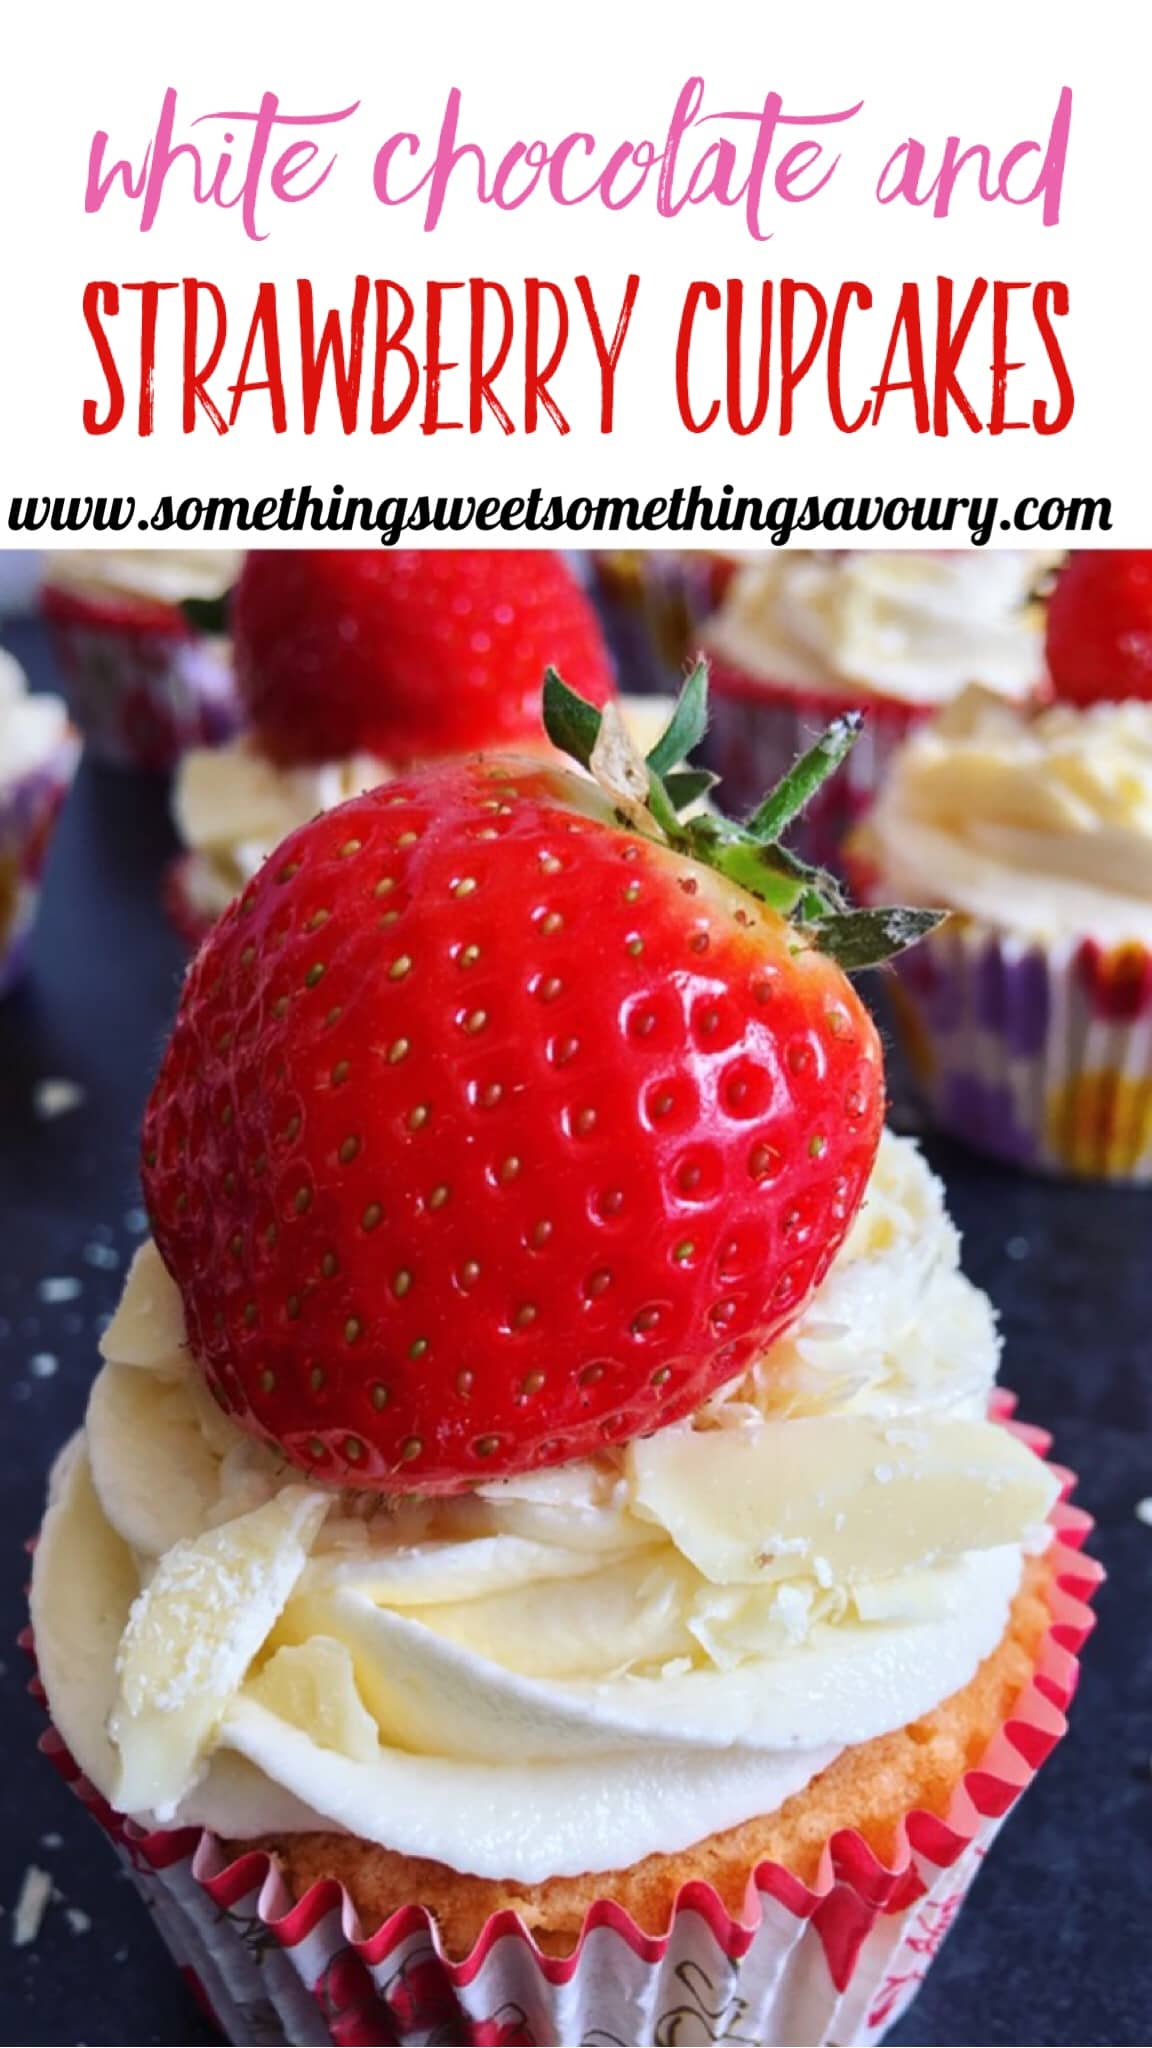 a pinterest image with the words "white chocolate and strawberry cupcakes" in red and purple text on a white background and a close up picture of a cupcake topped with white chocolate frosting, a strawberry and grated white chocolate